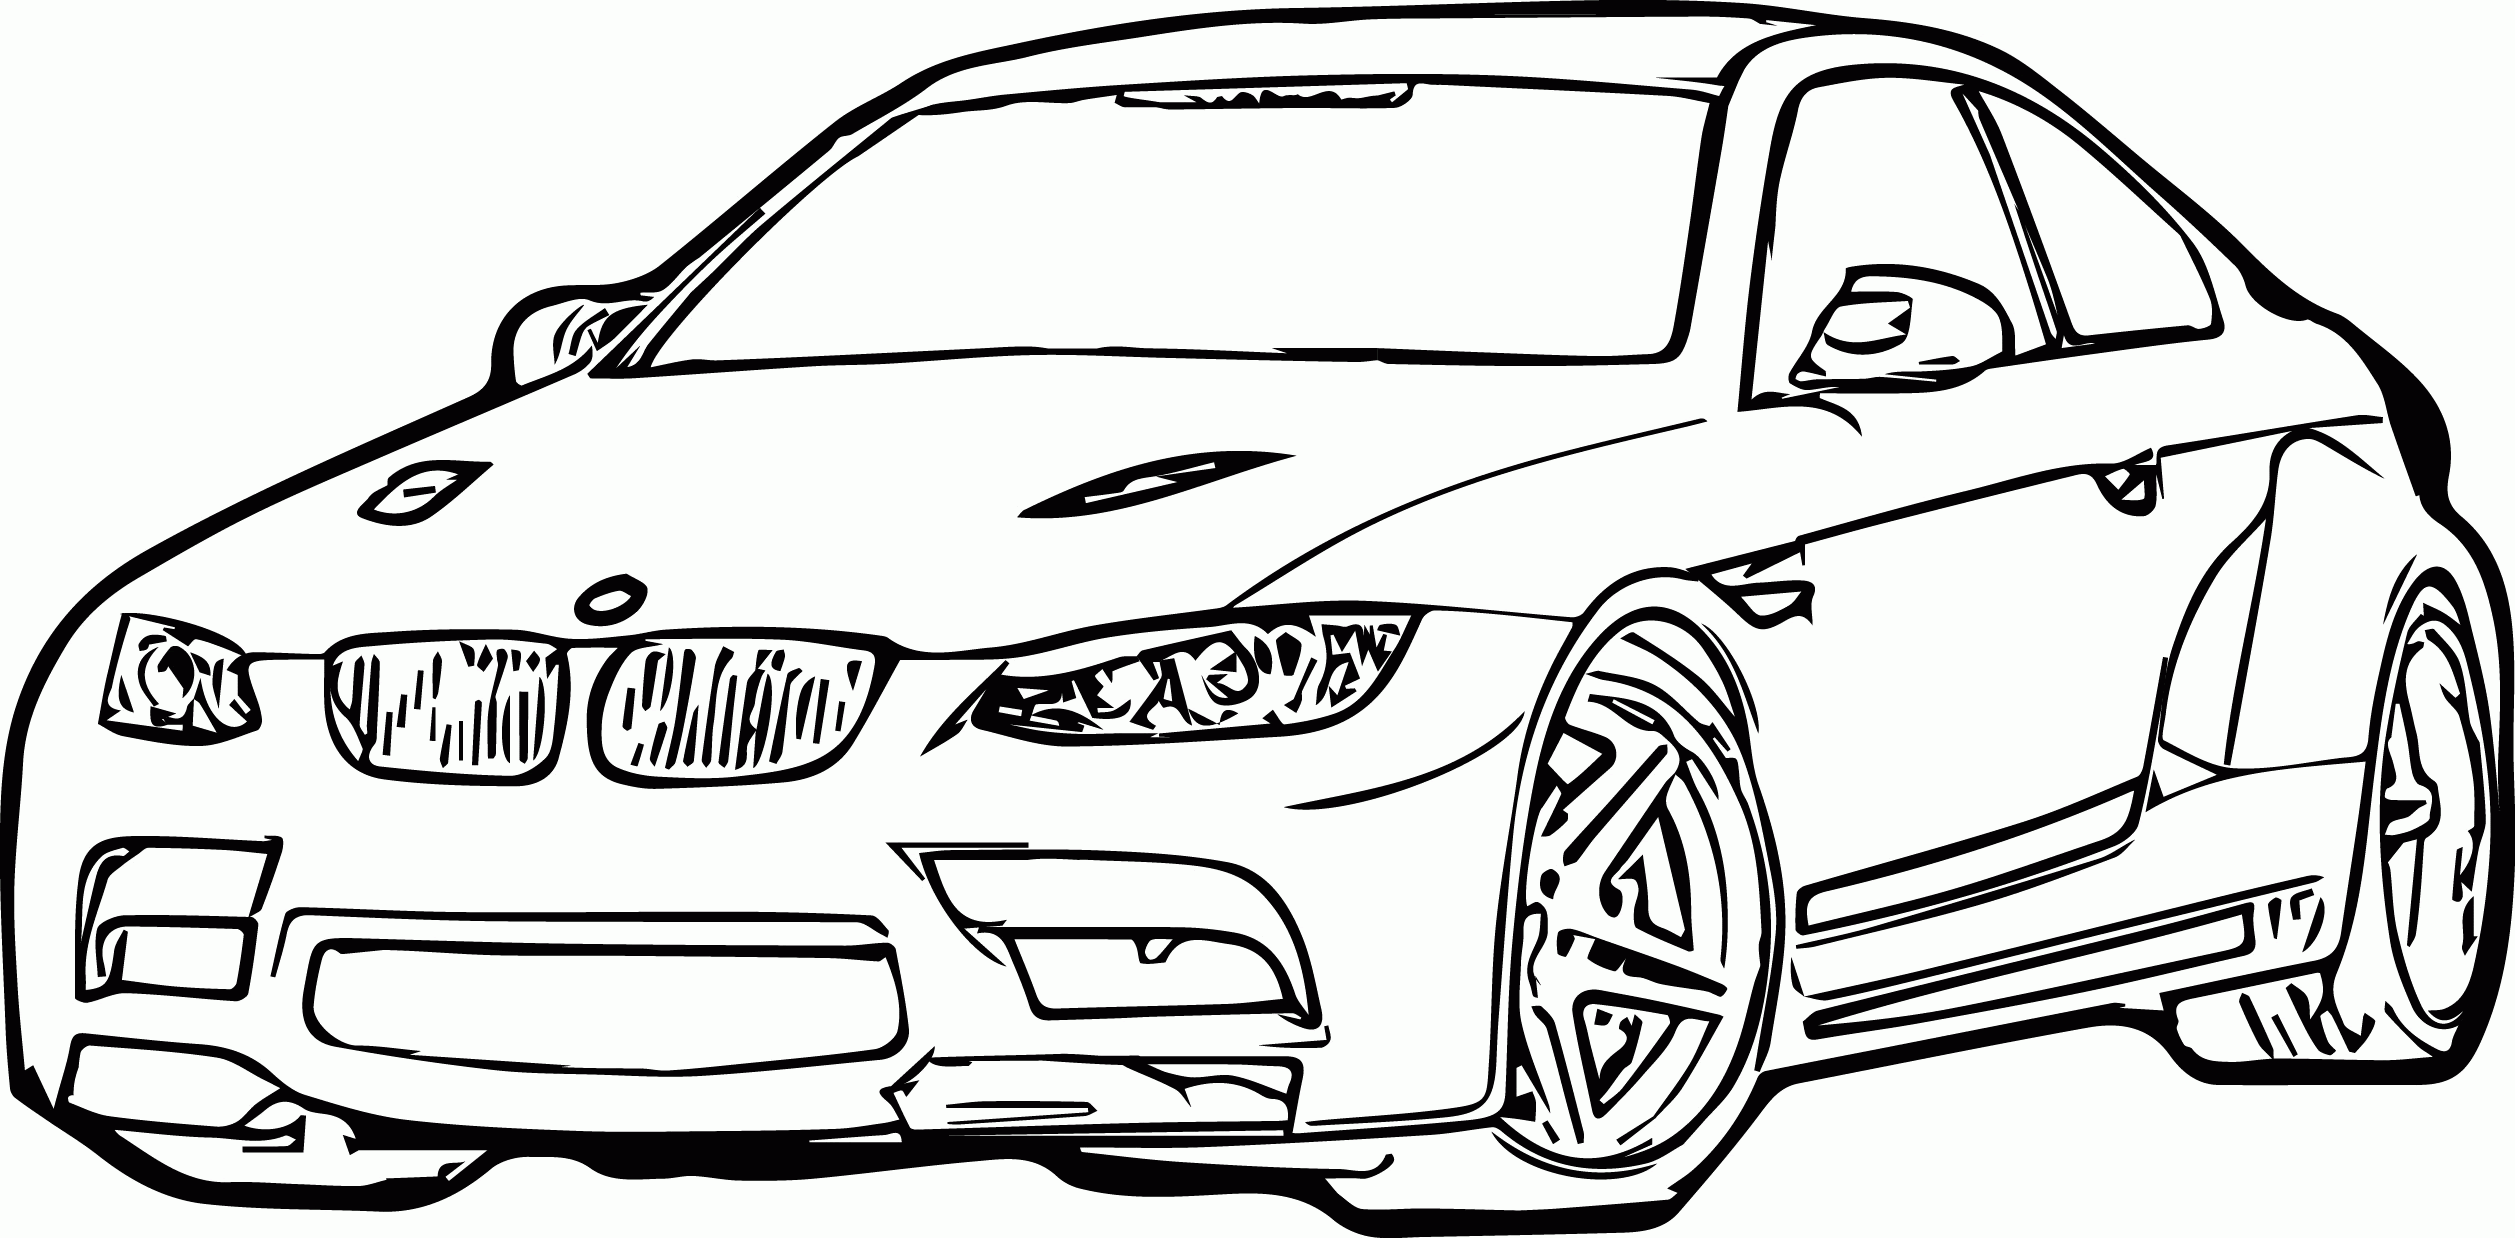 Download Backgammon site vvkf: Coloring Pages Cars Bmw